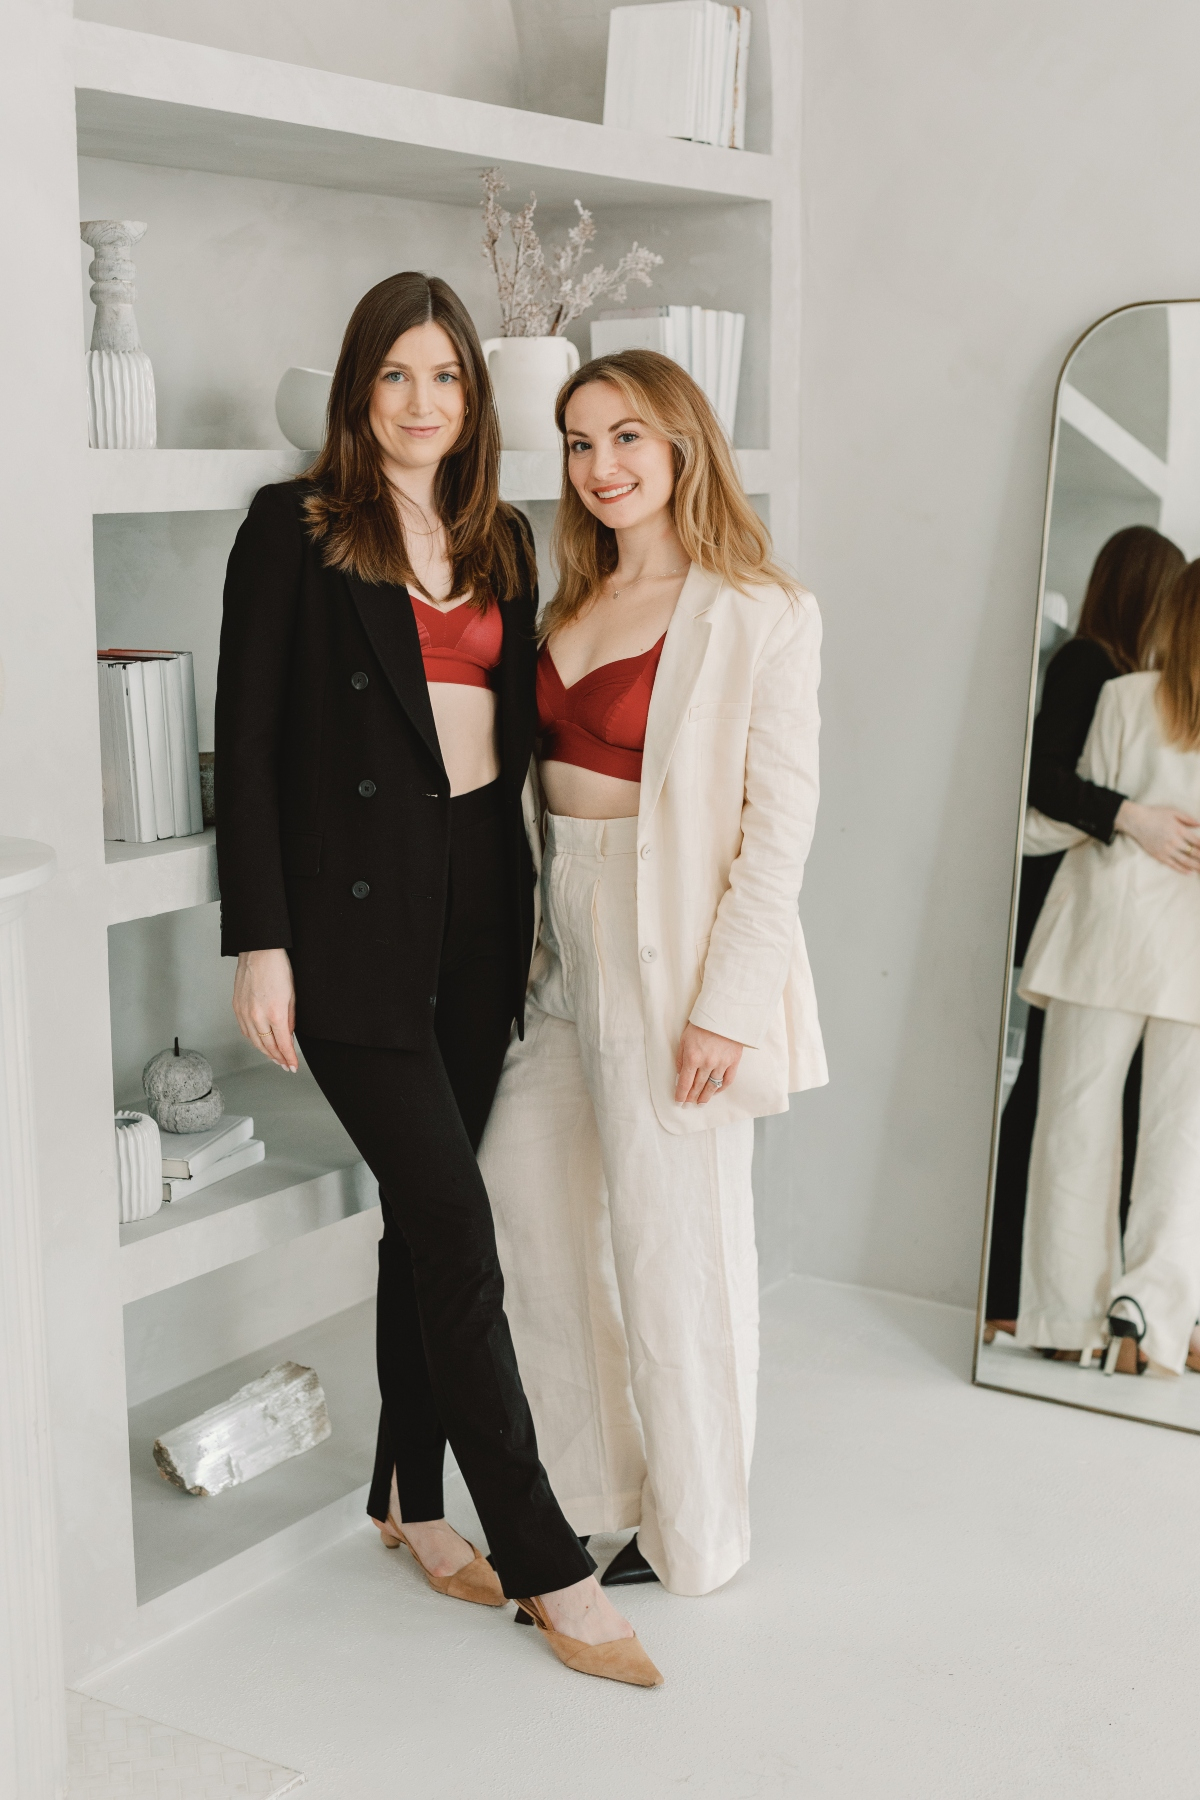 Cake Lingerie Re-brands Focusing On Openness and Sustainability